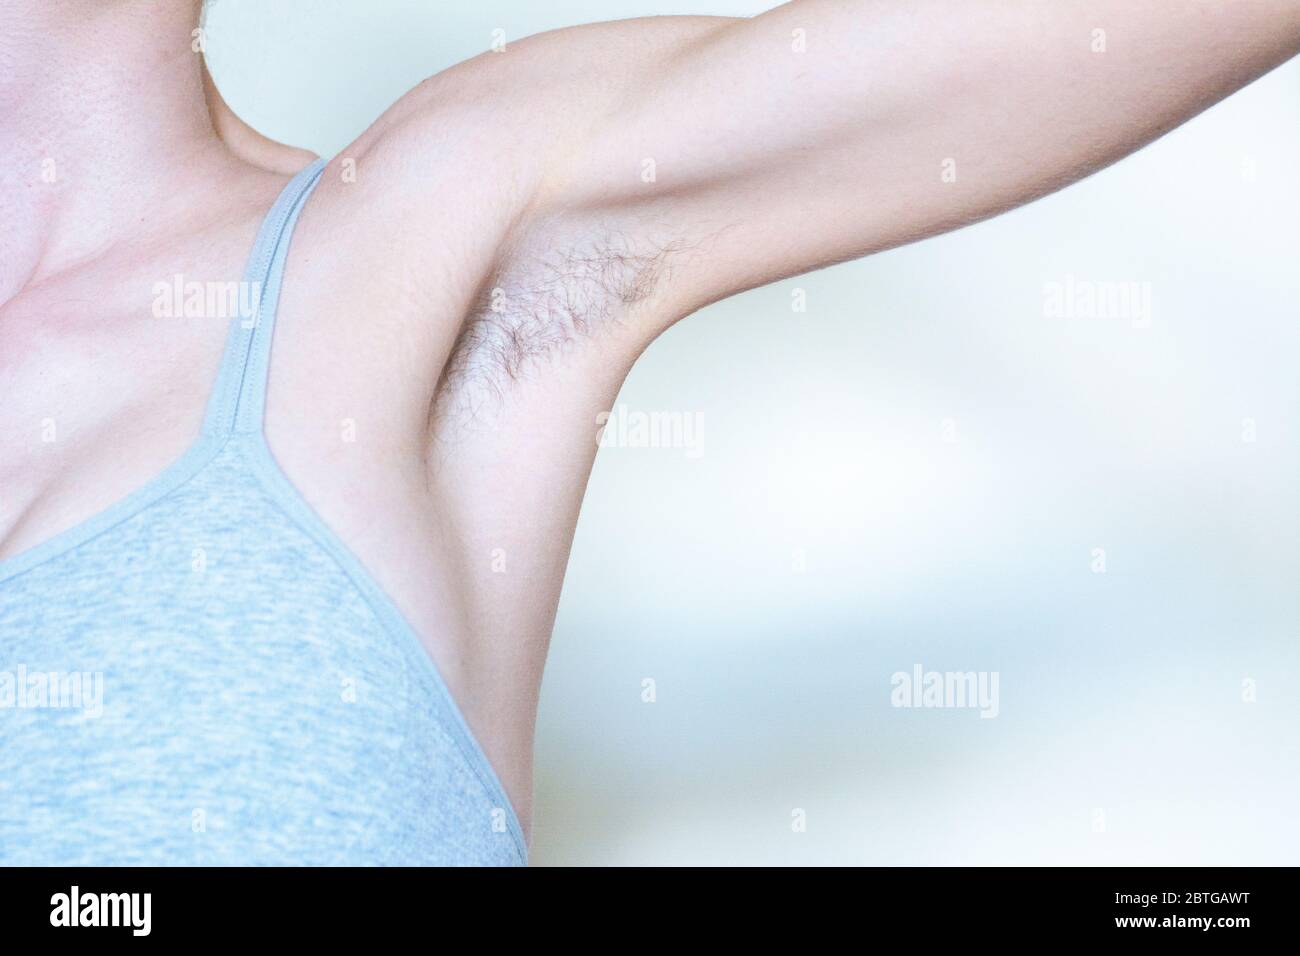 A woman displaying a hairy armpit before shaving it Stock Photo